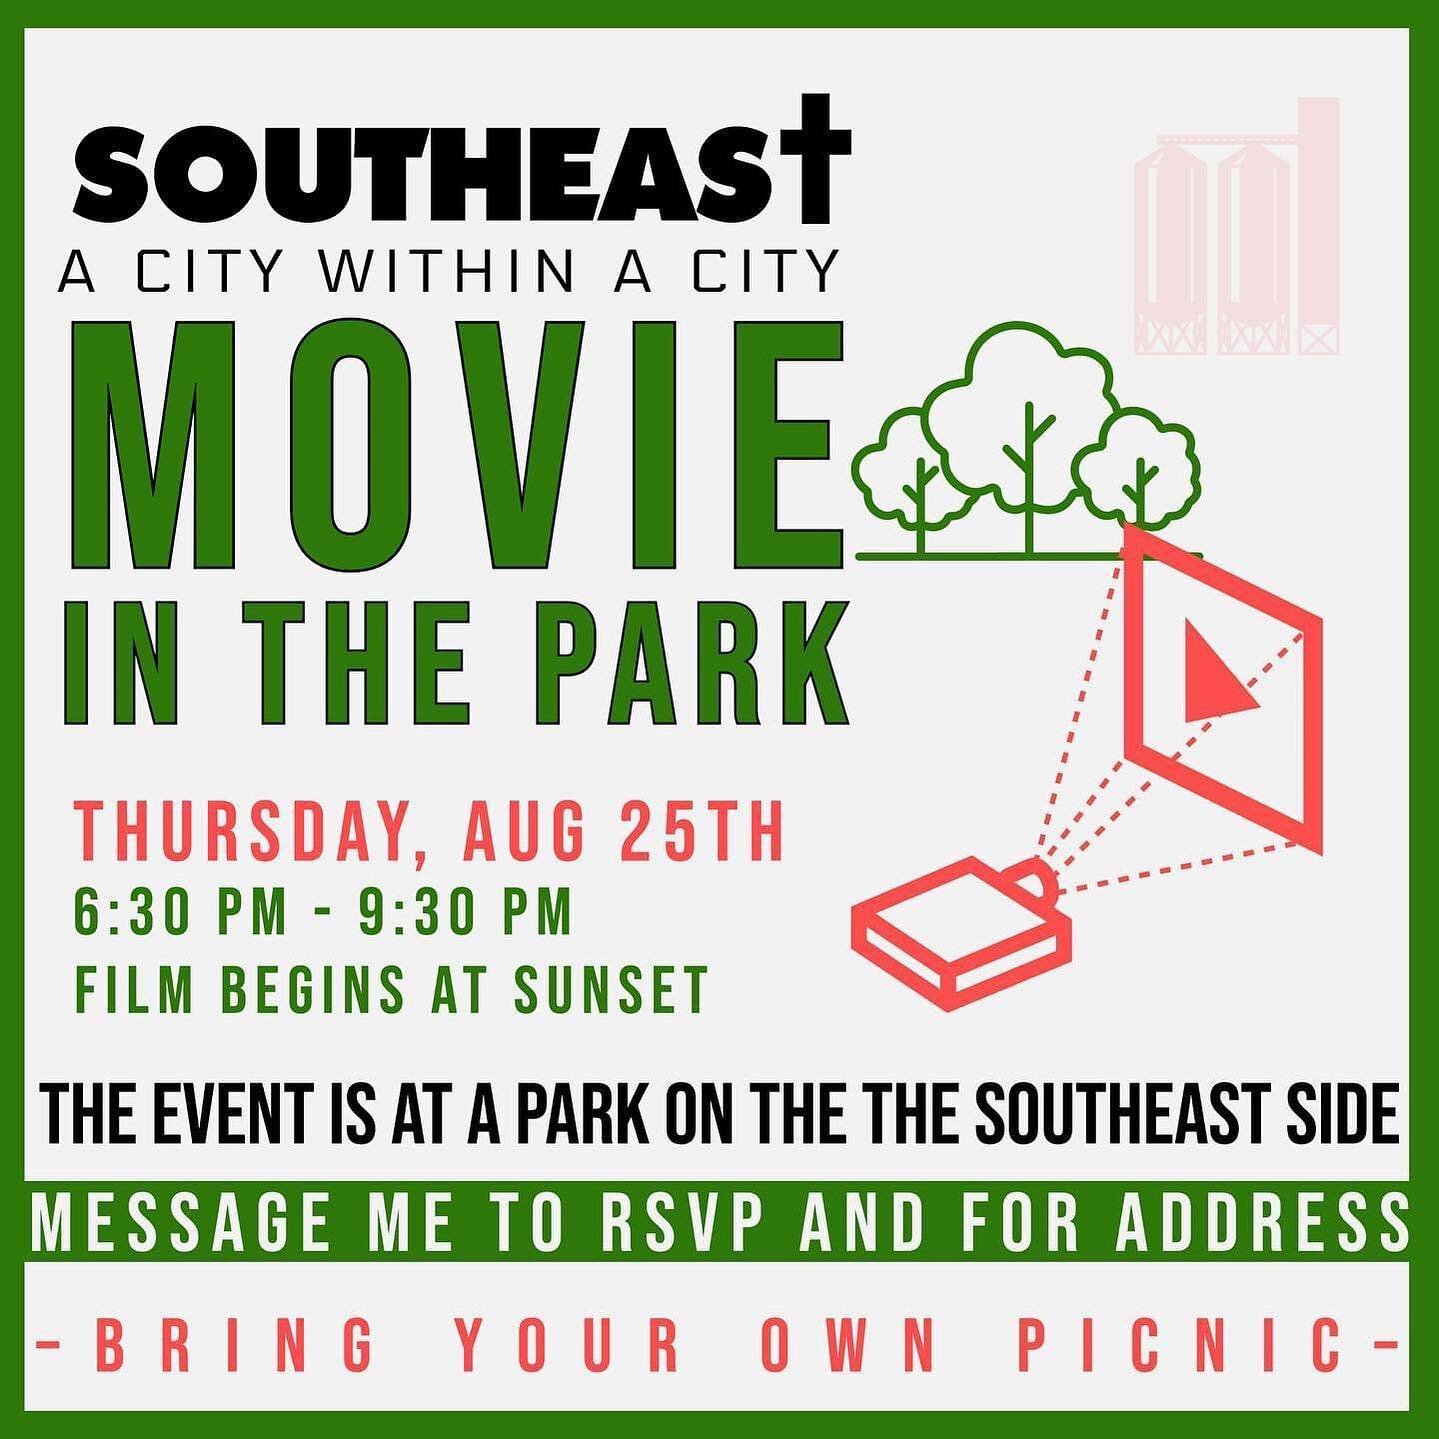 This Thursday! ⚠️

Please come through to this live screening of Southeast: a city within a city! 

This is possibly the last. And it&rsquo;s been really dope to watch @stevenjwalsh coordinate with others to put on all of these free screenings for th